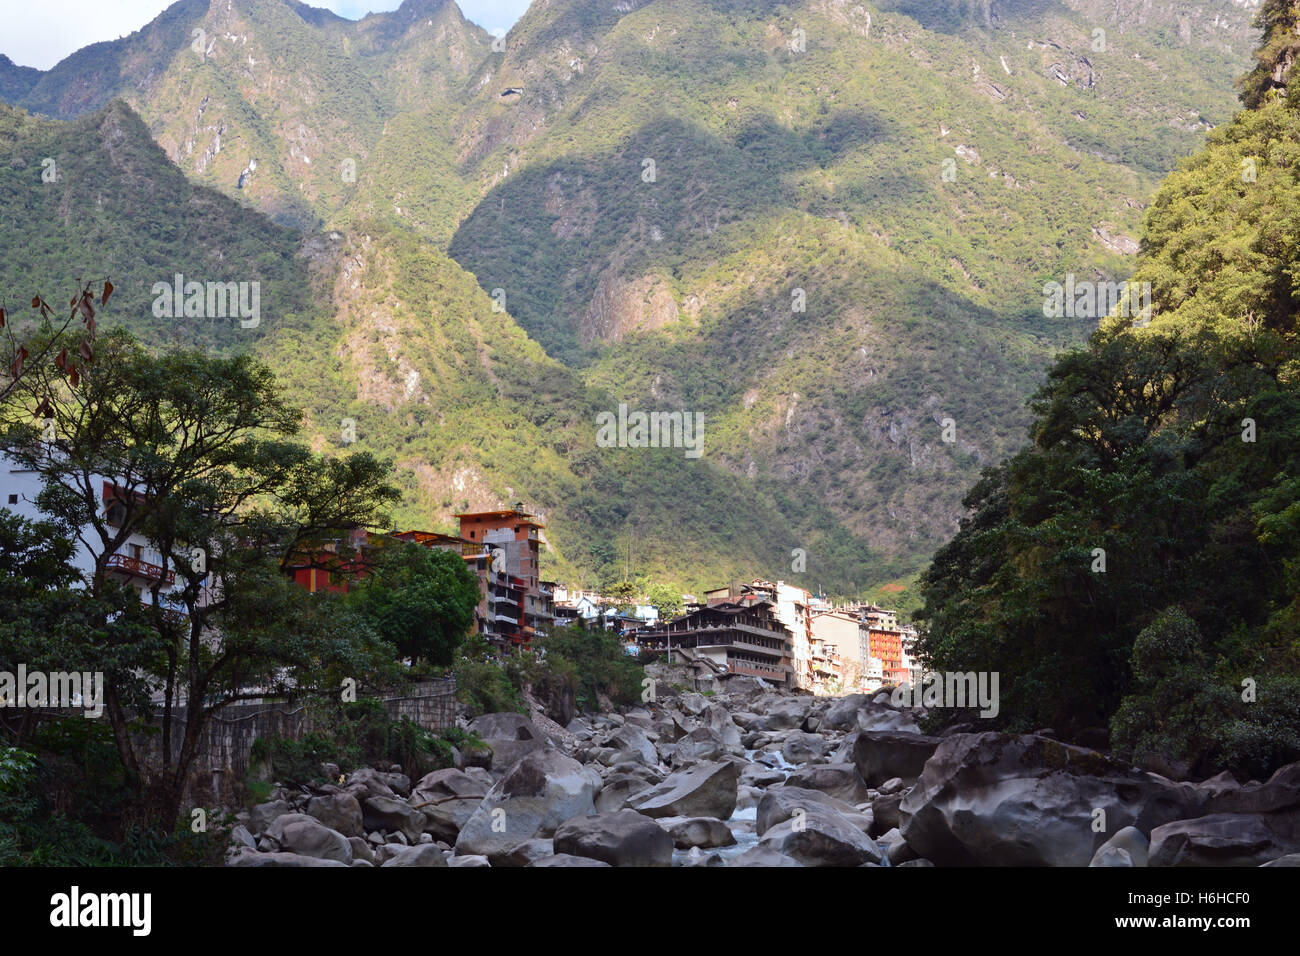 The boulder strewn Willkanuta River during the winter dry season leading out of Aguas Calientes at the base of Machu Picchu. Stock Photo